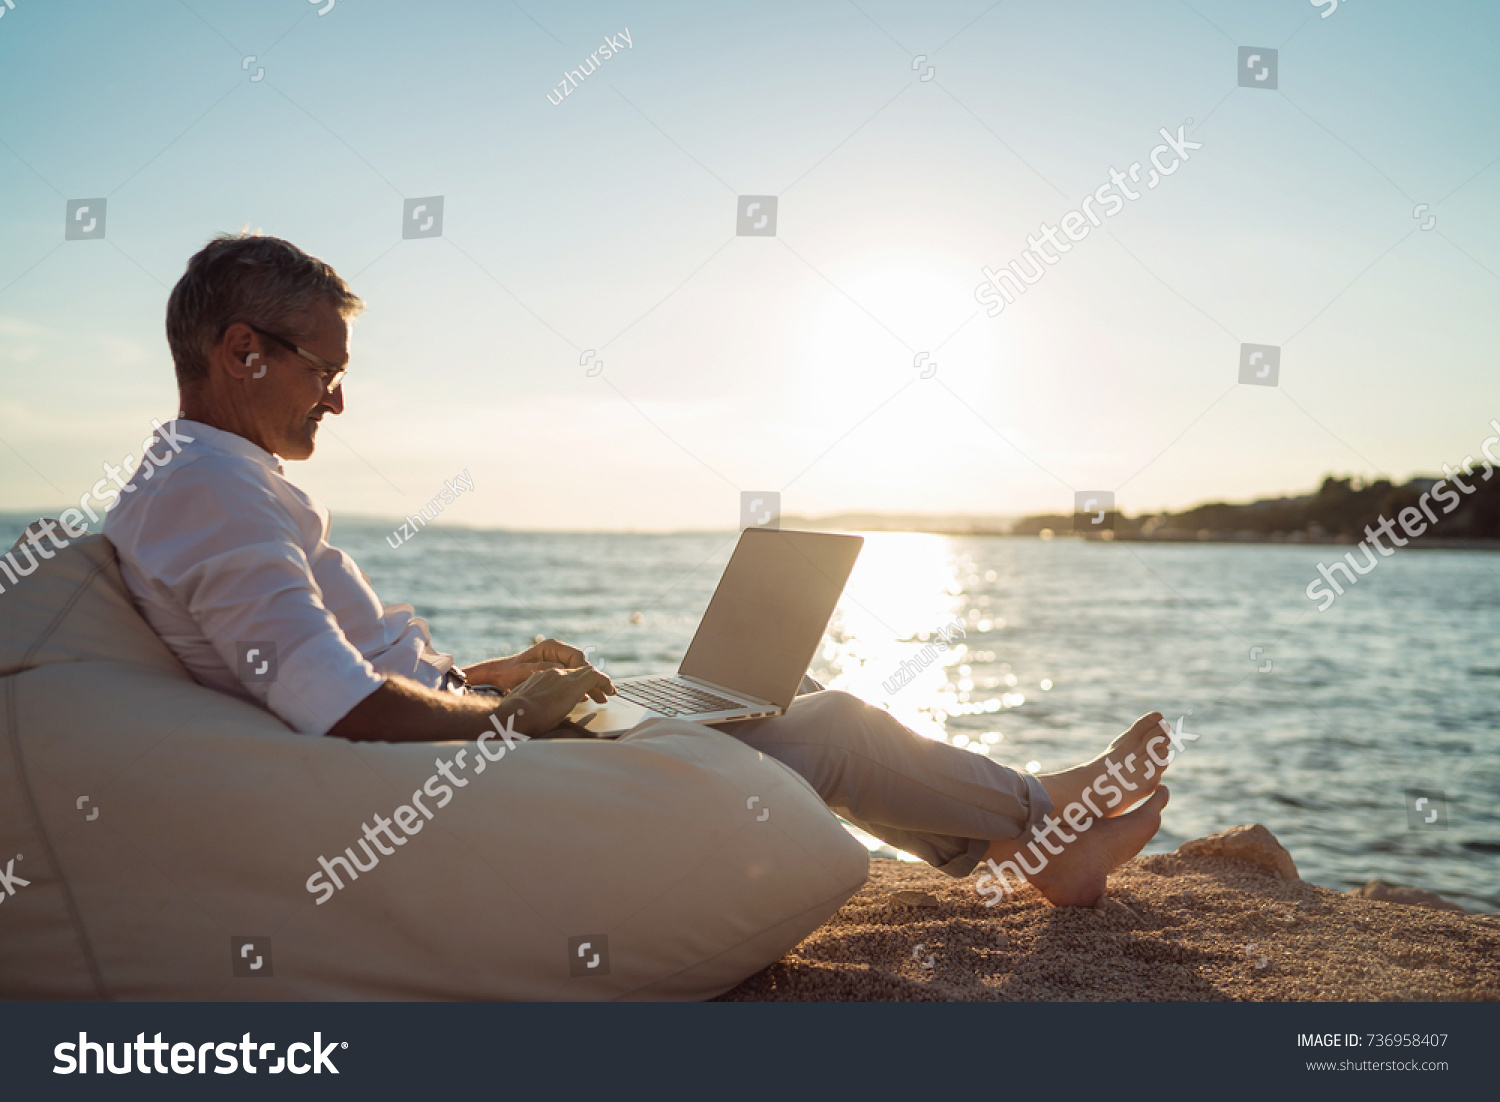 Senior man working on his laptop lying on deck chair on the beach during sunset #736958407